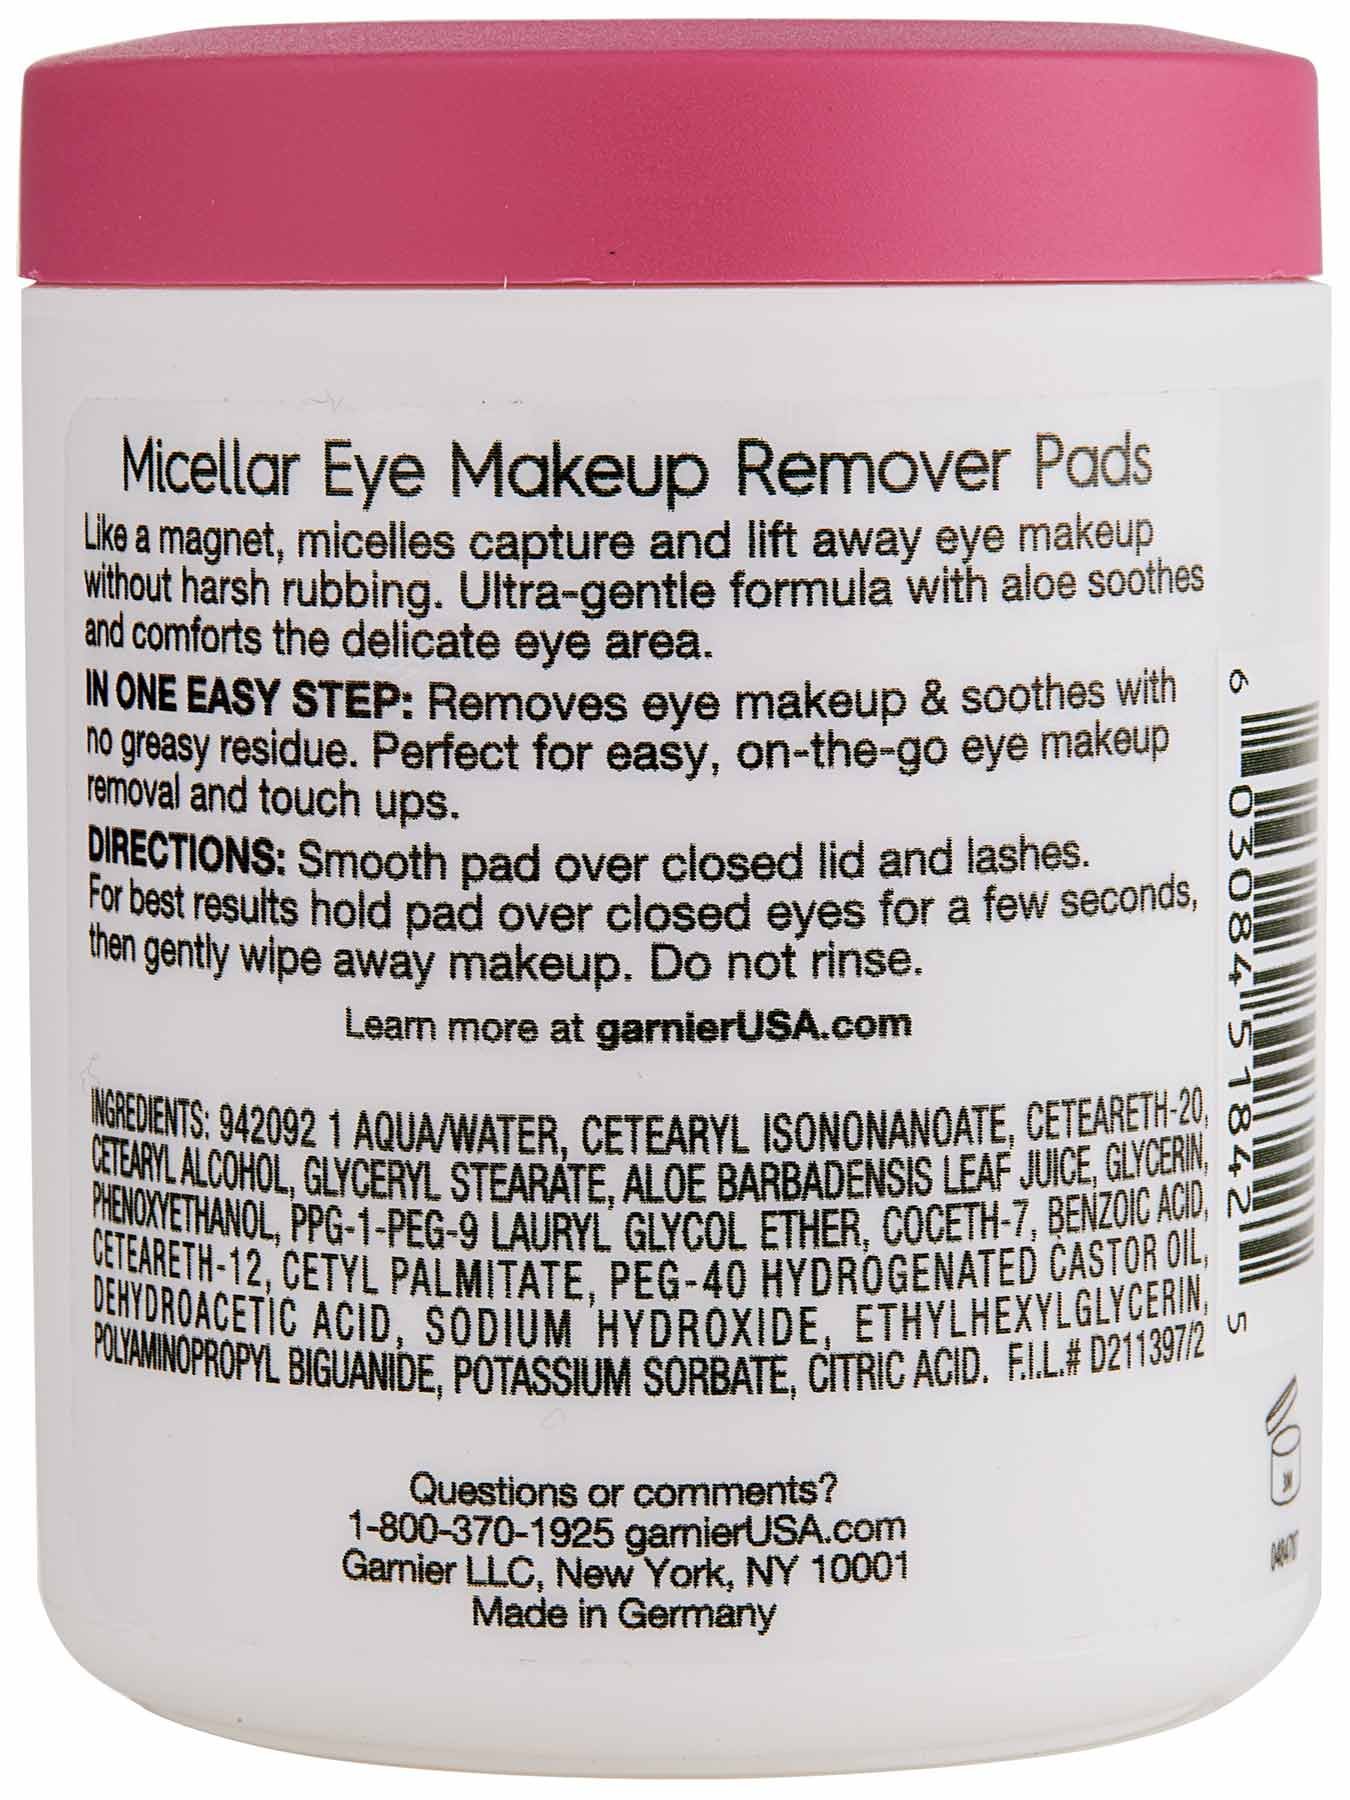 Back view of Micellar Eye Makeup Remover Pads.